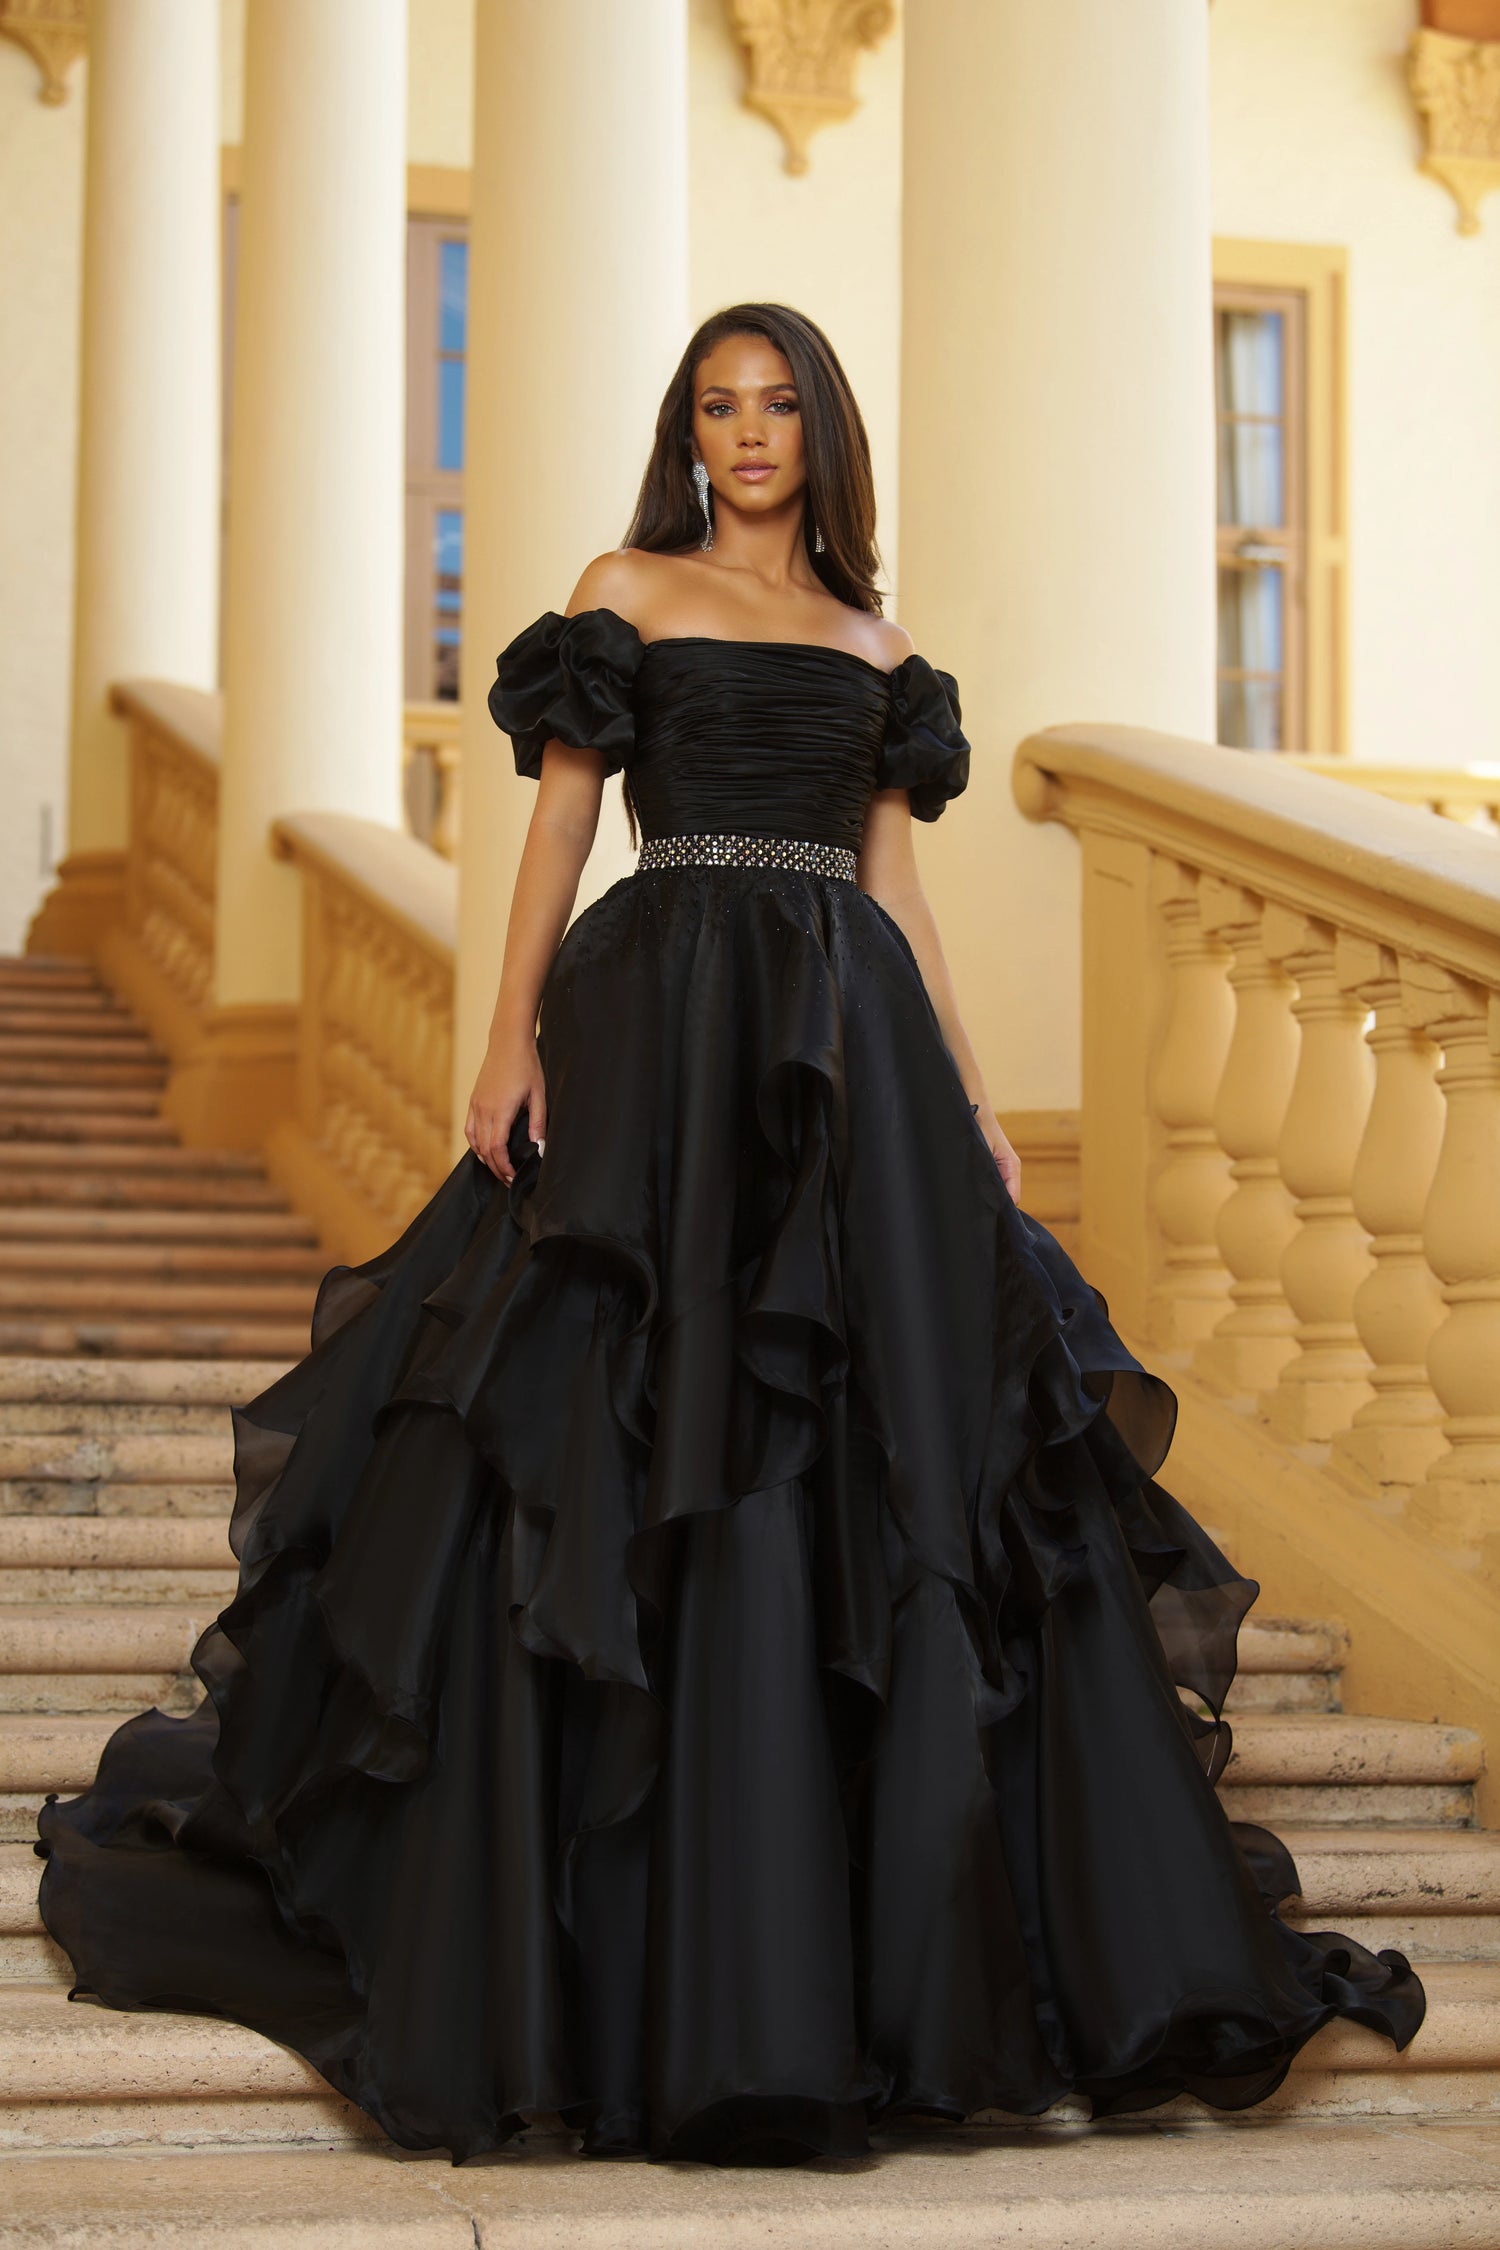 Ava-Presley-28571-black-evening-gown